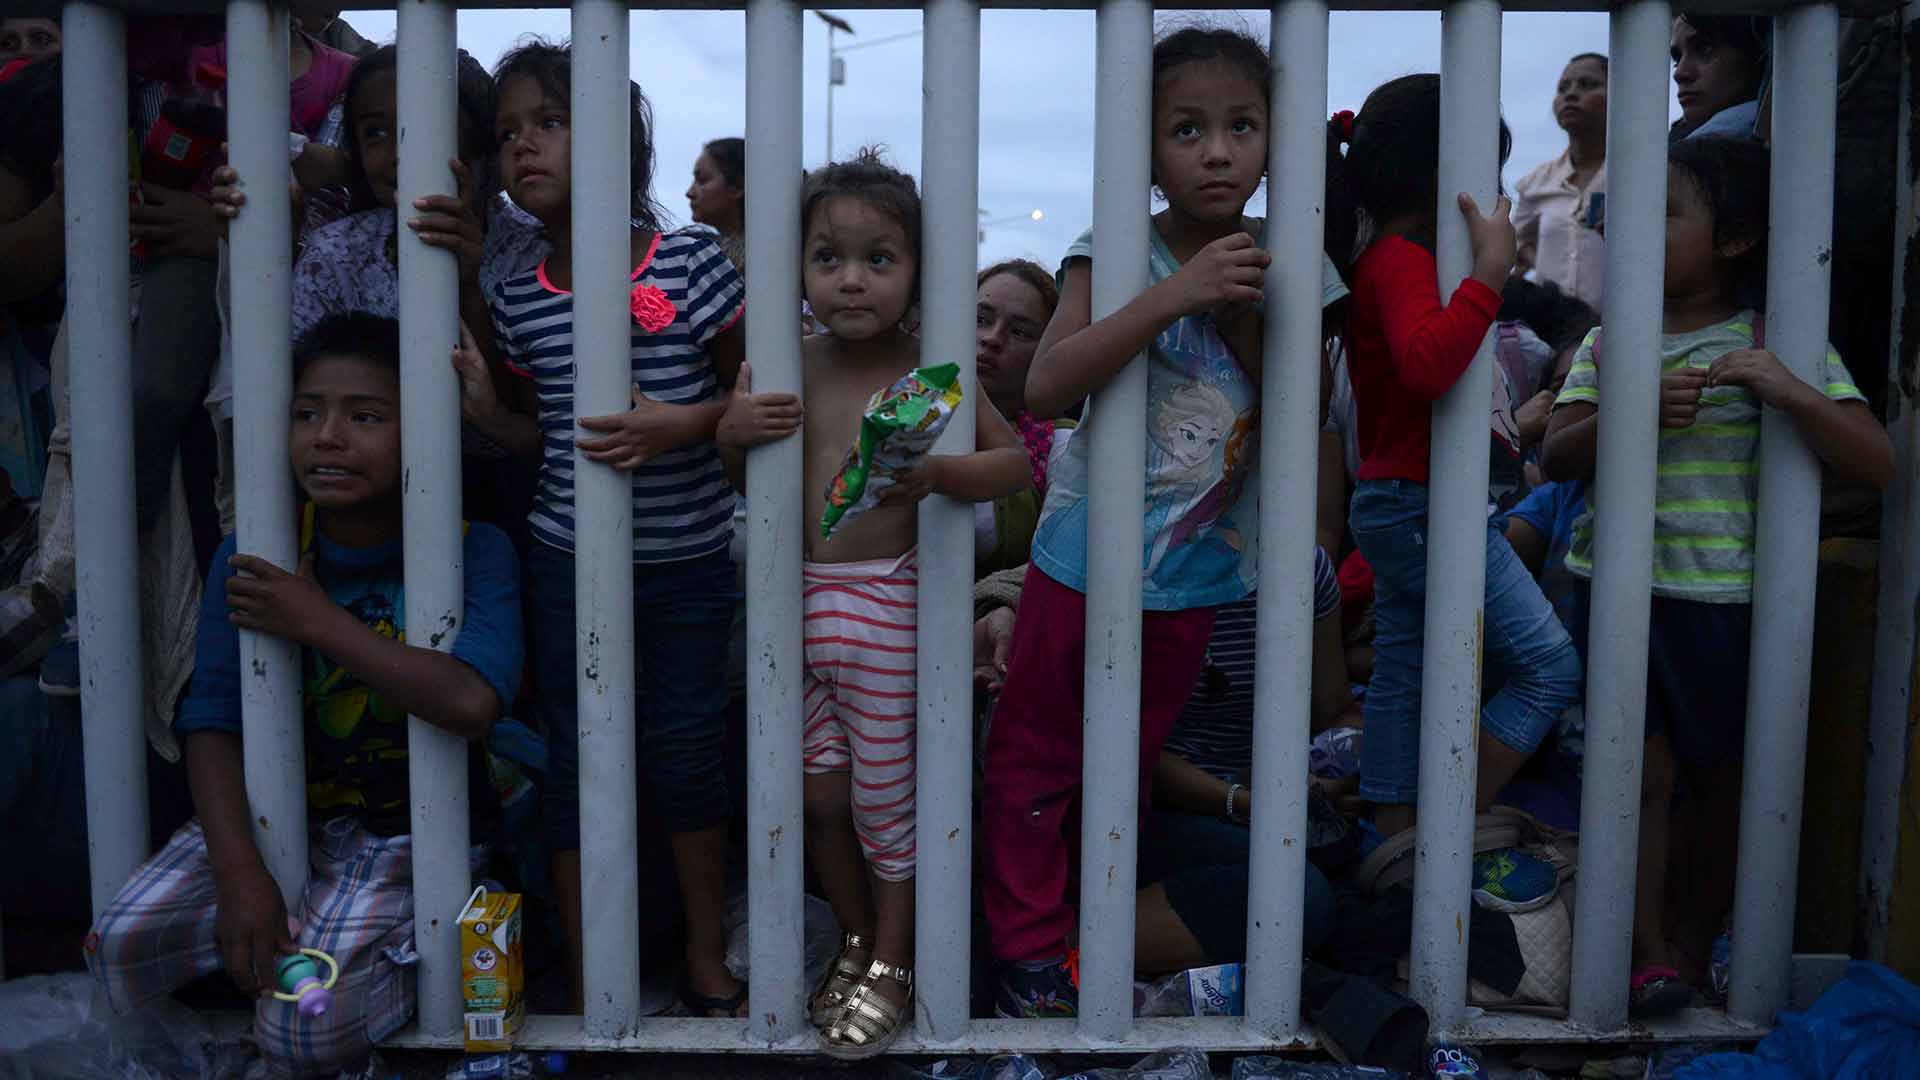 Thousands of migrants cross into Mexico after fleeing violence in Honduras